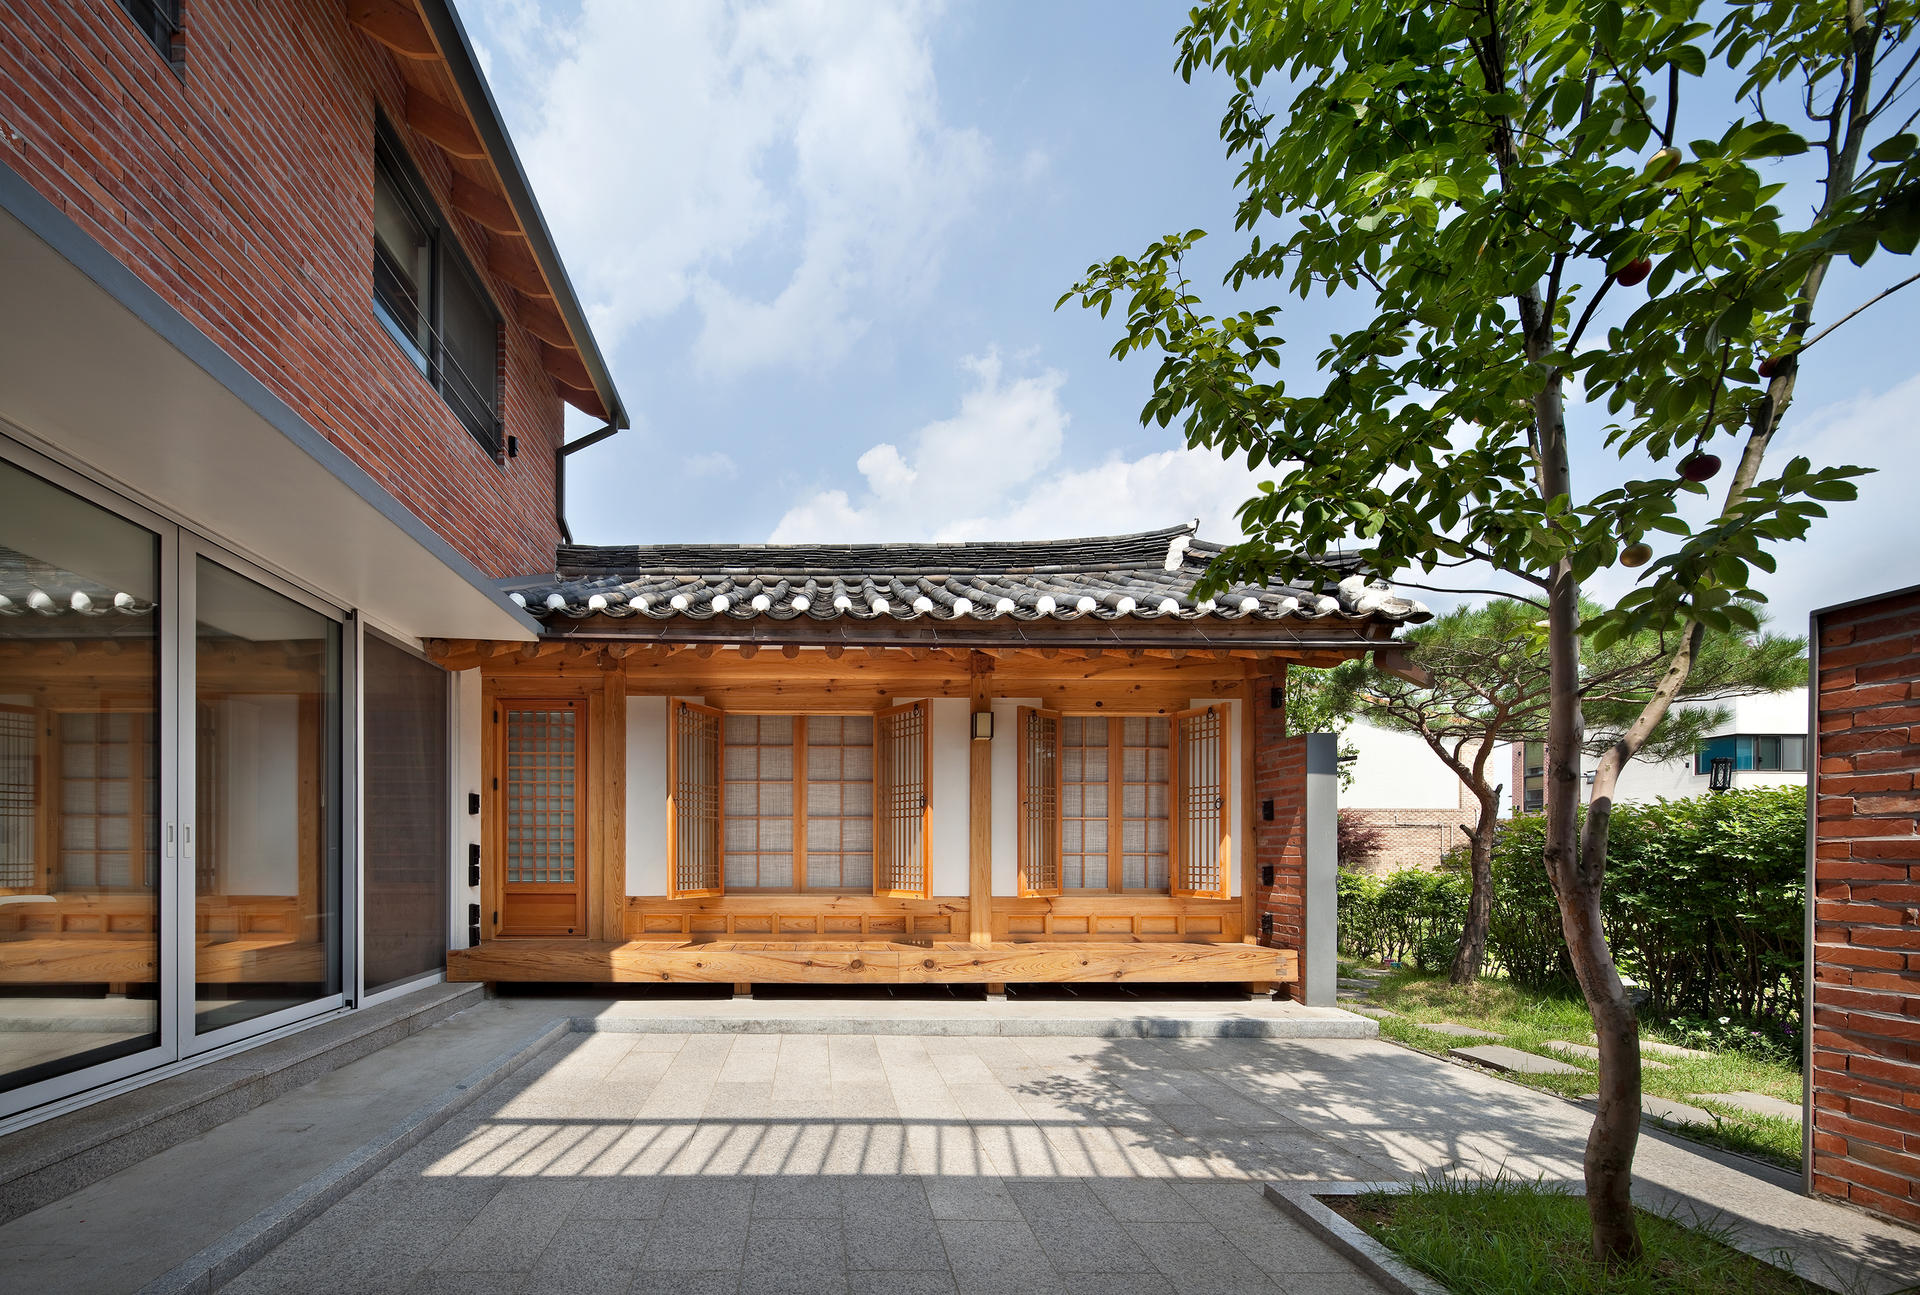 Seoul's Bukchon district is famous for its traditional courtyard homes, where stone, wood and clay are the only construction materials used. Photo: Joonhwan Yoon